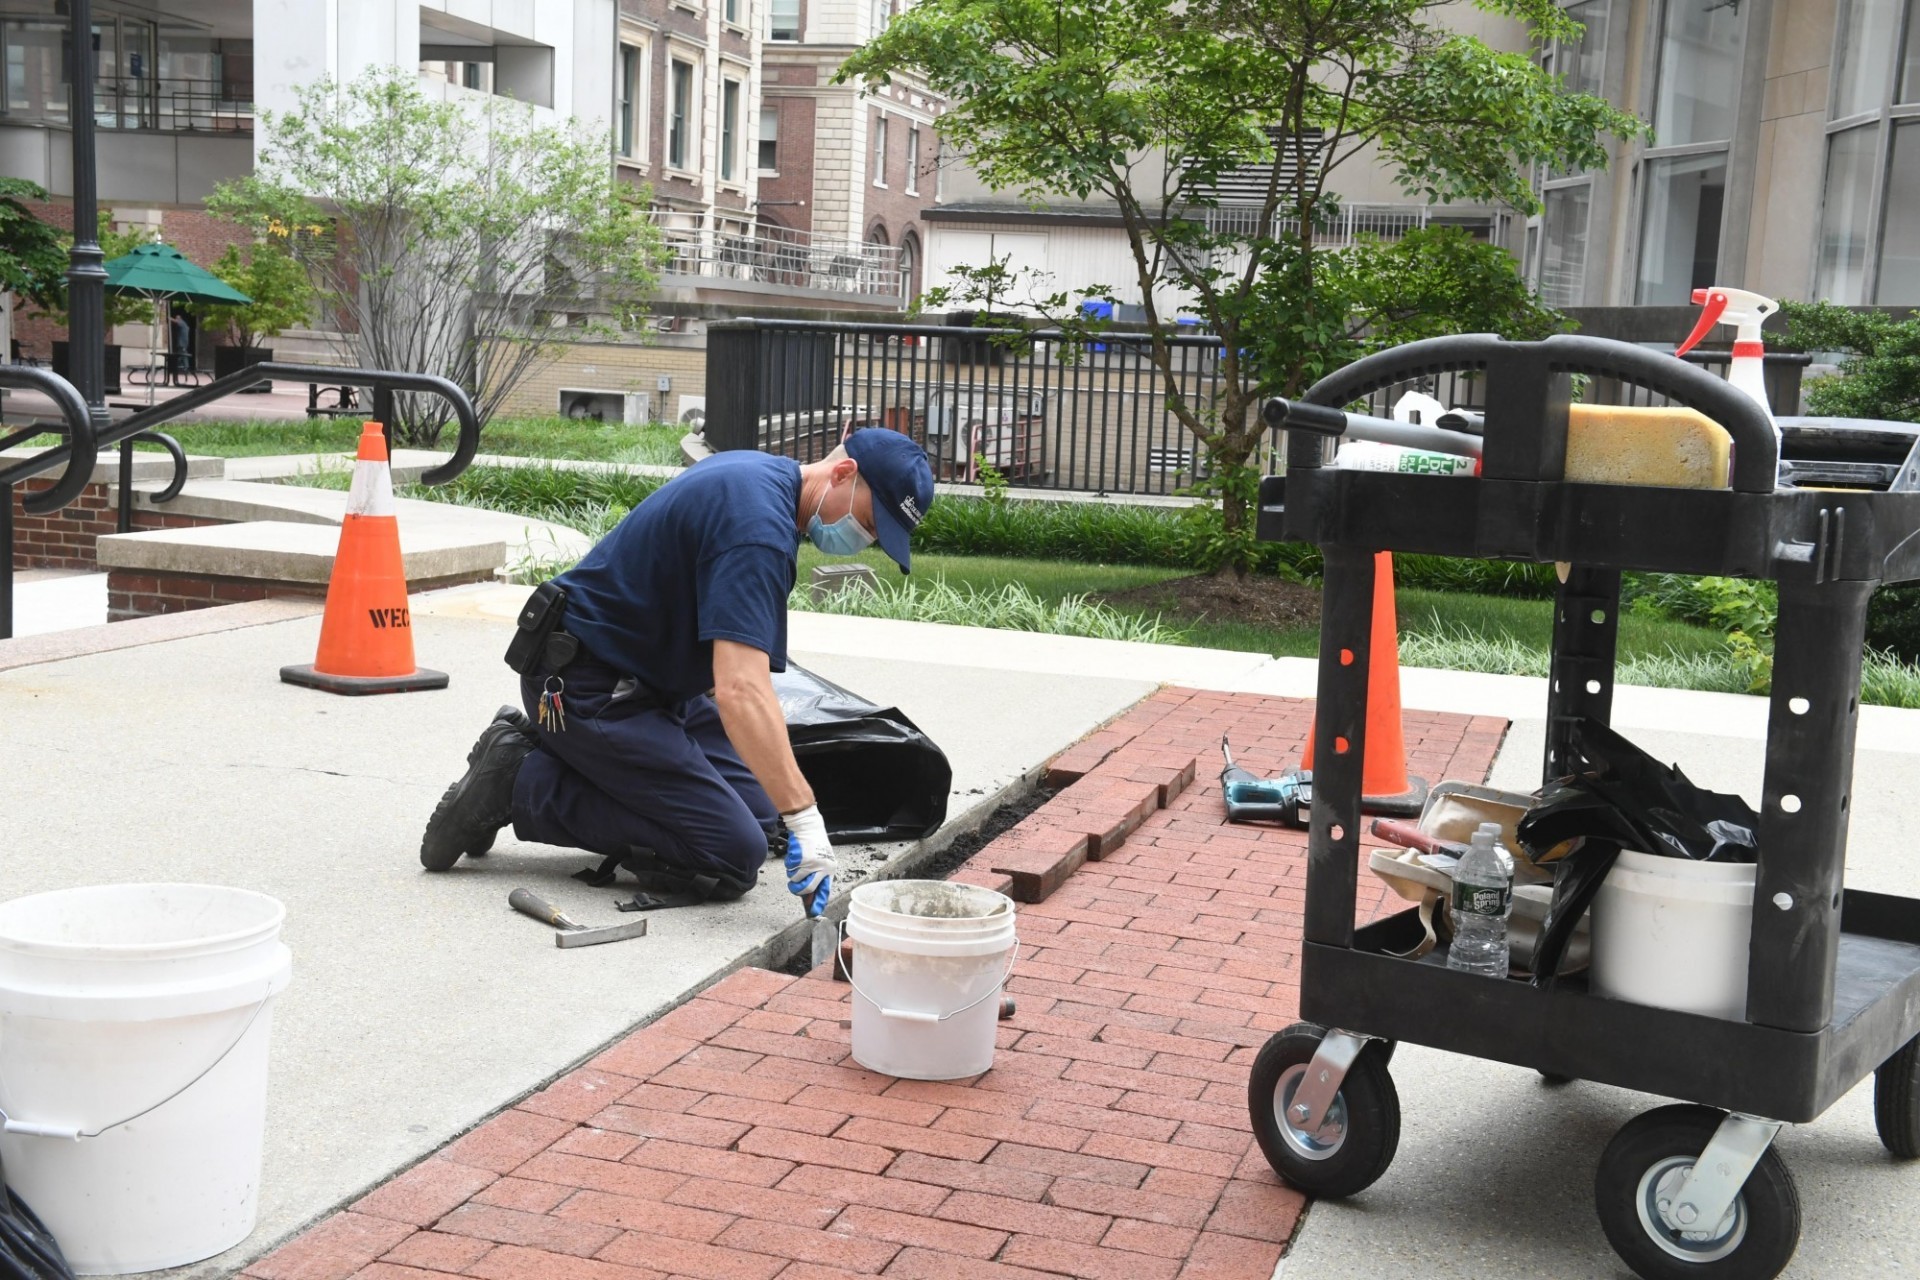 A member of the grounds crew wearing a dark blue t-shirt and baseball hat is replacing brick pavers in a pathway.